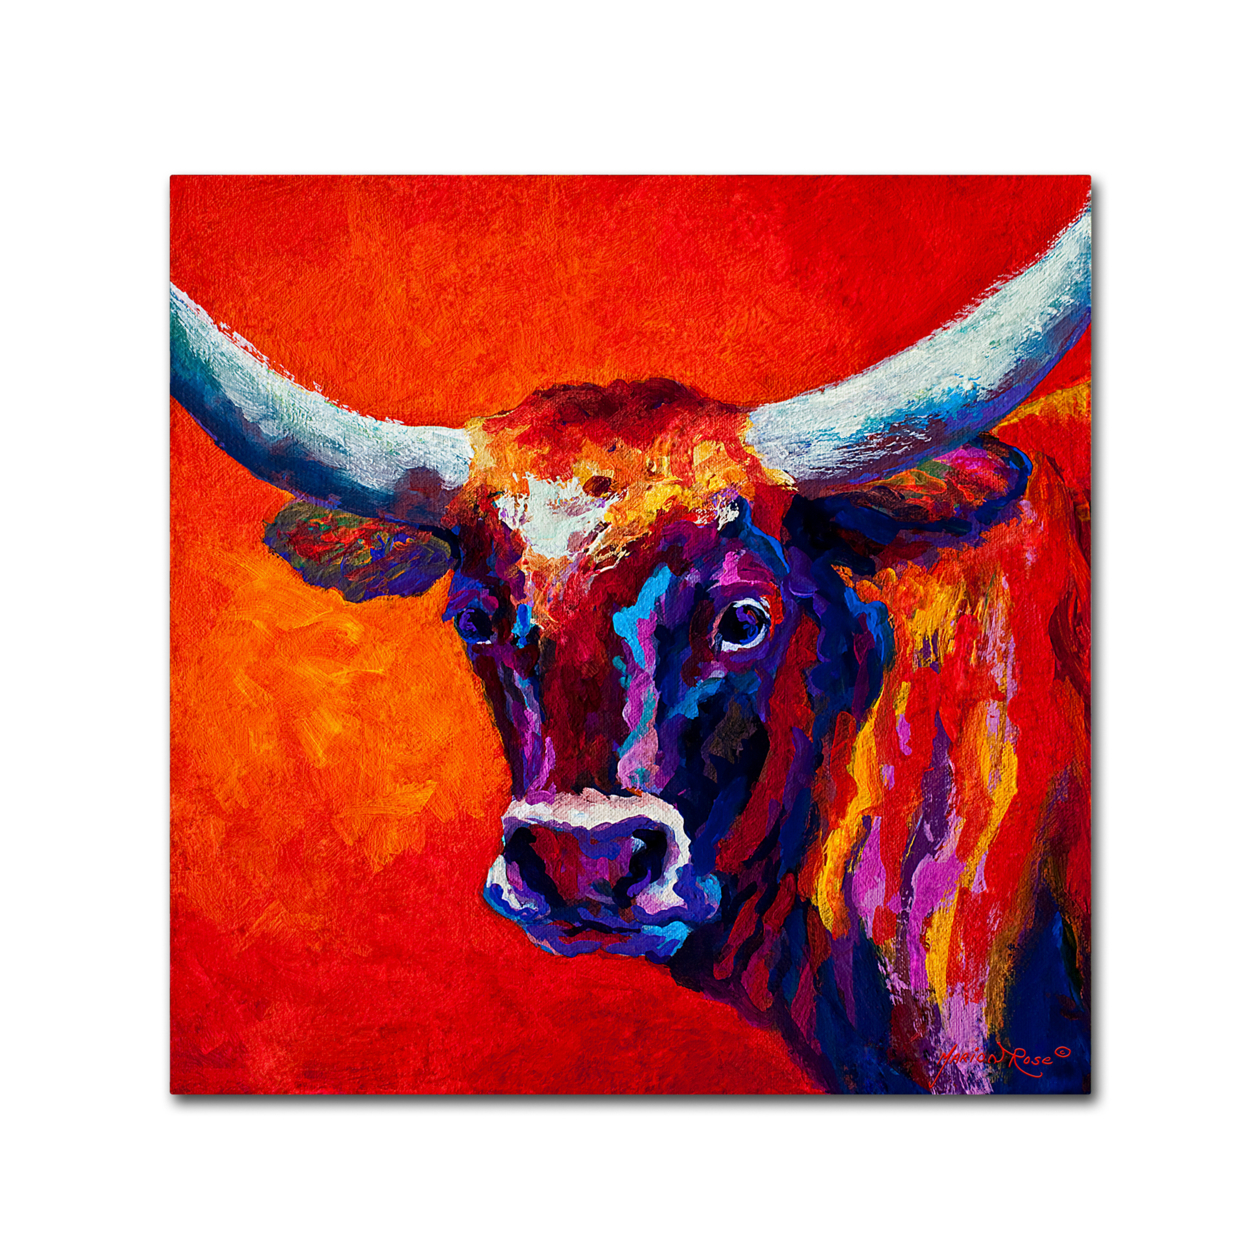 Marion Rose 'Steer' Ready To Hang Canvas Art 35 X 35 Inches Made In USA